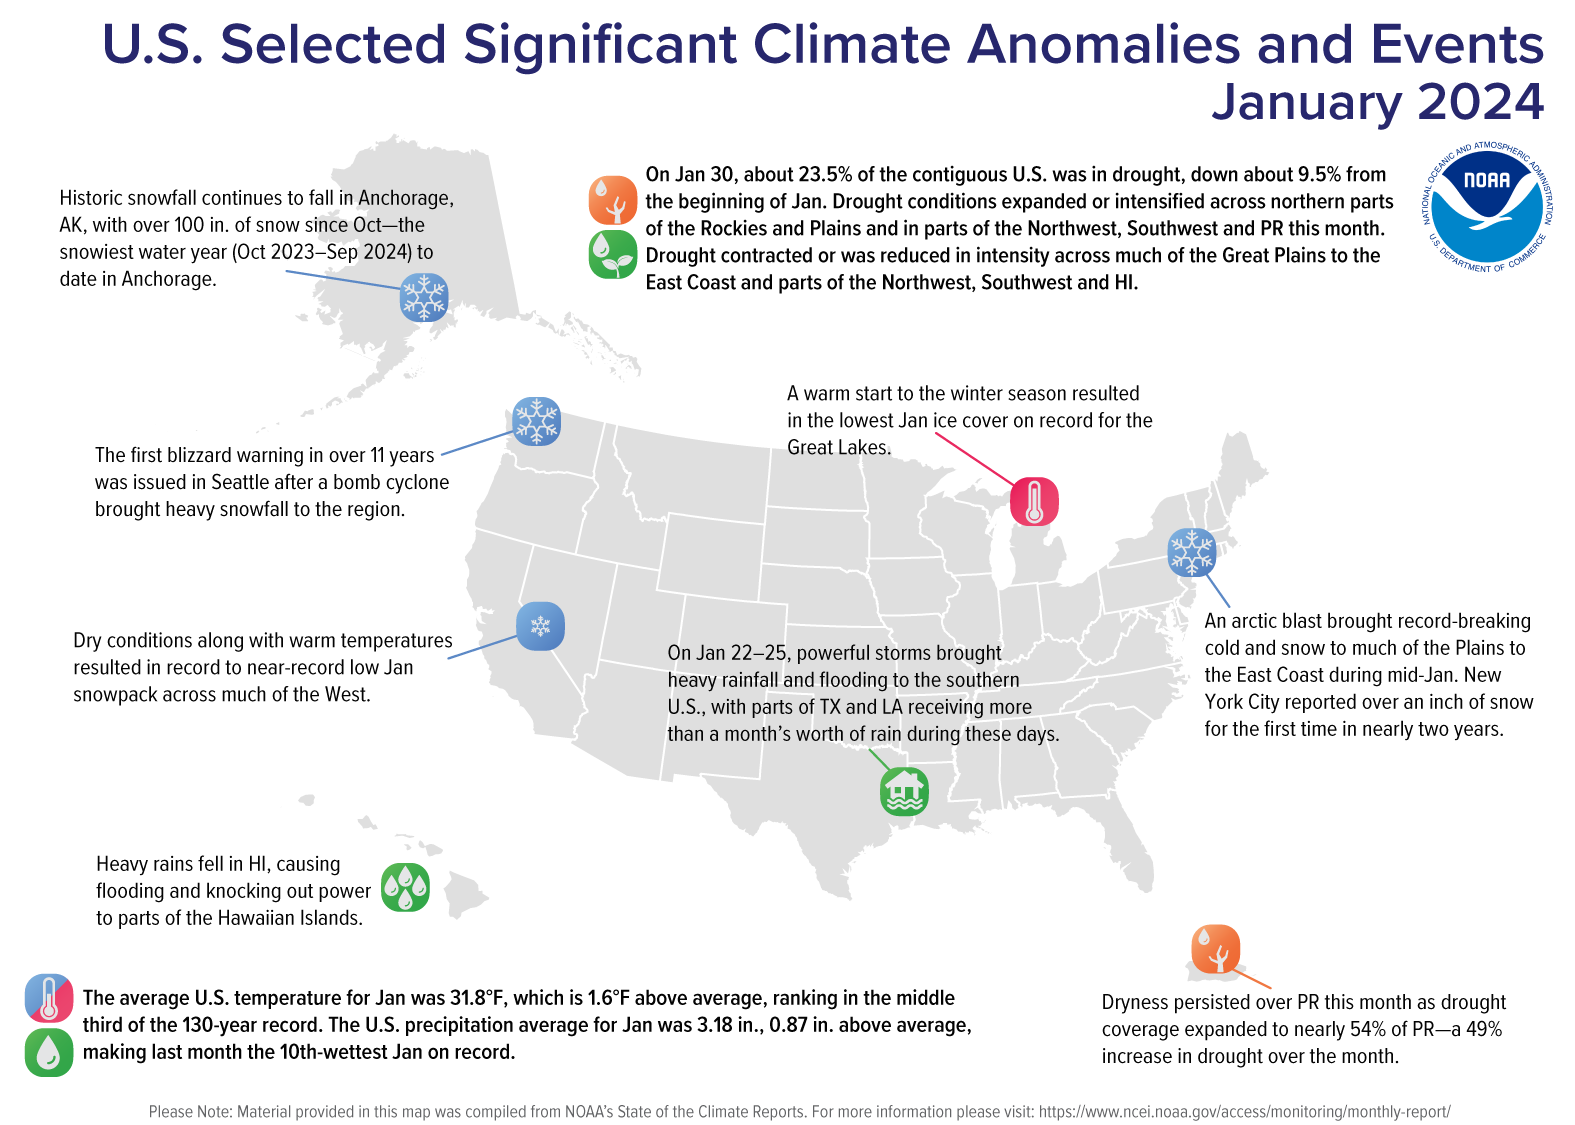 A map of the U.S. plotted with significant climate events that occurred during January 2024. Please see the story below as well as more details in the report summary from NOAA NCEI at http://bit.ly/USClimate202401.